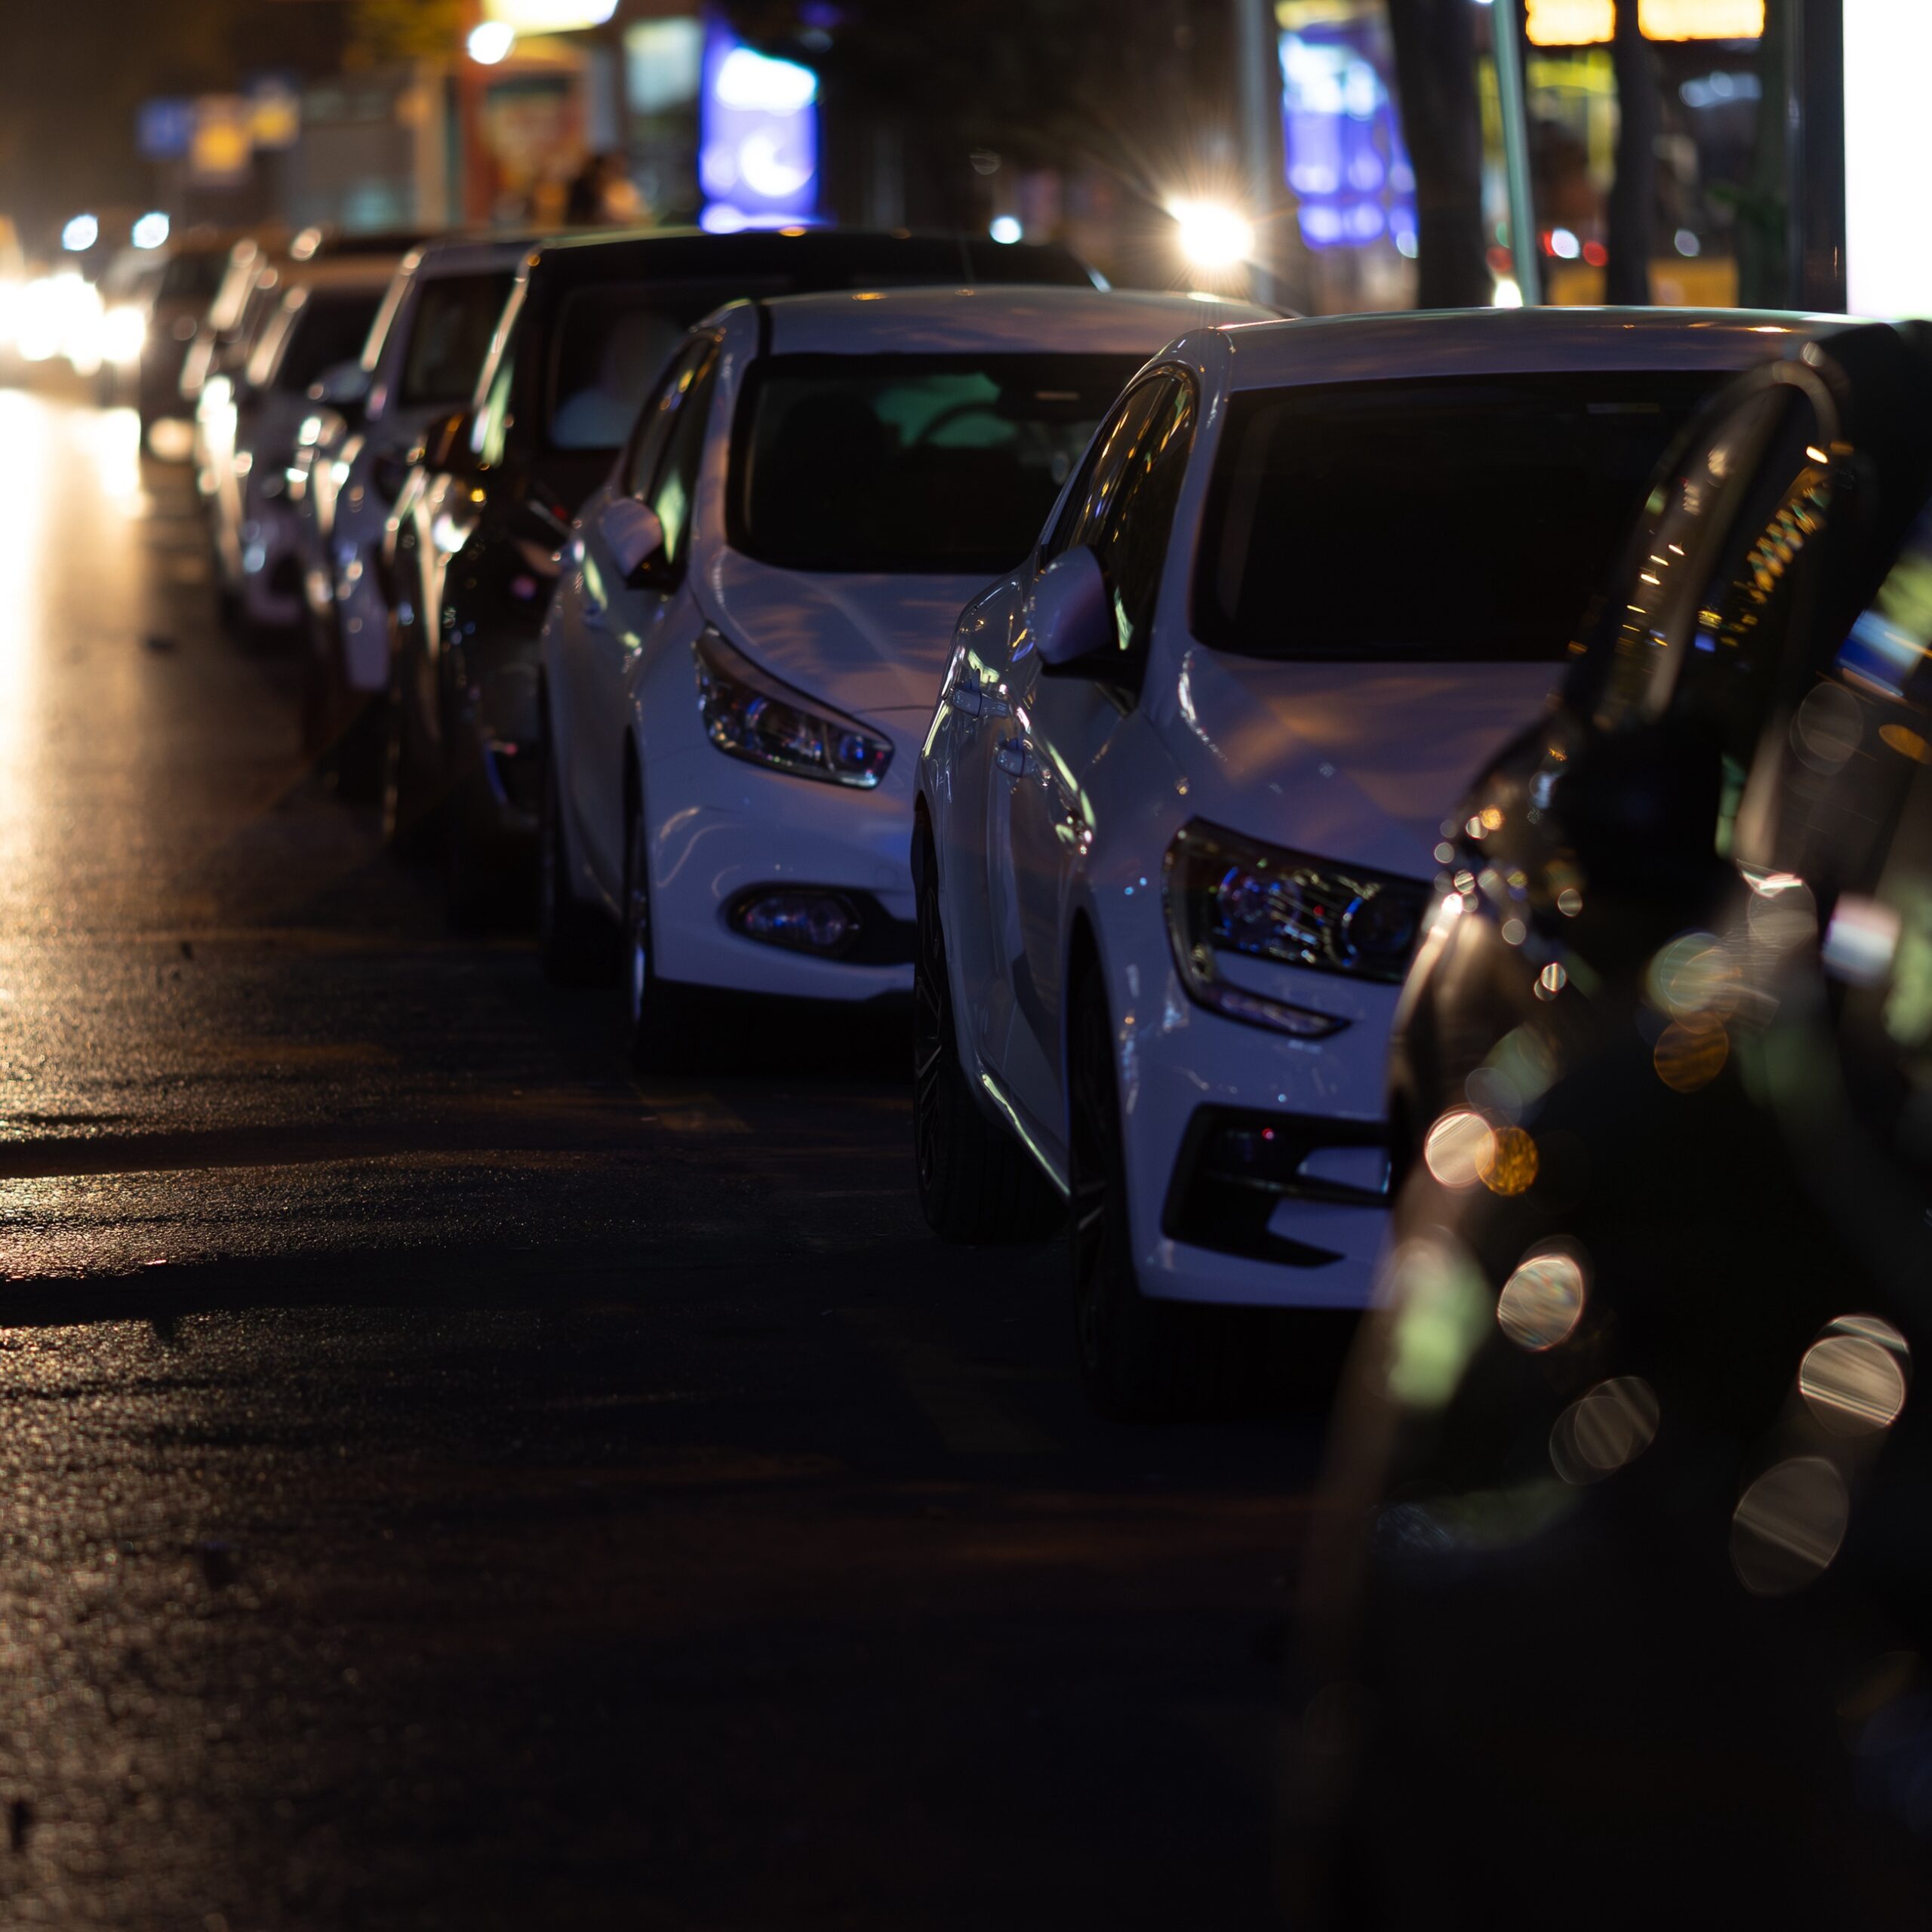 Cars standing in a row at night in parking. Urban street.